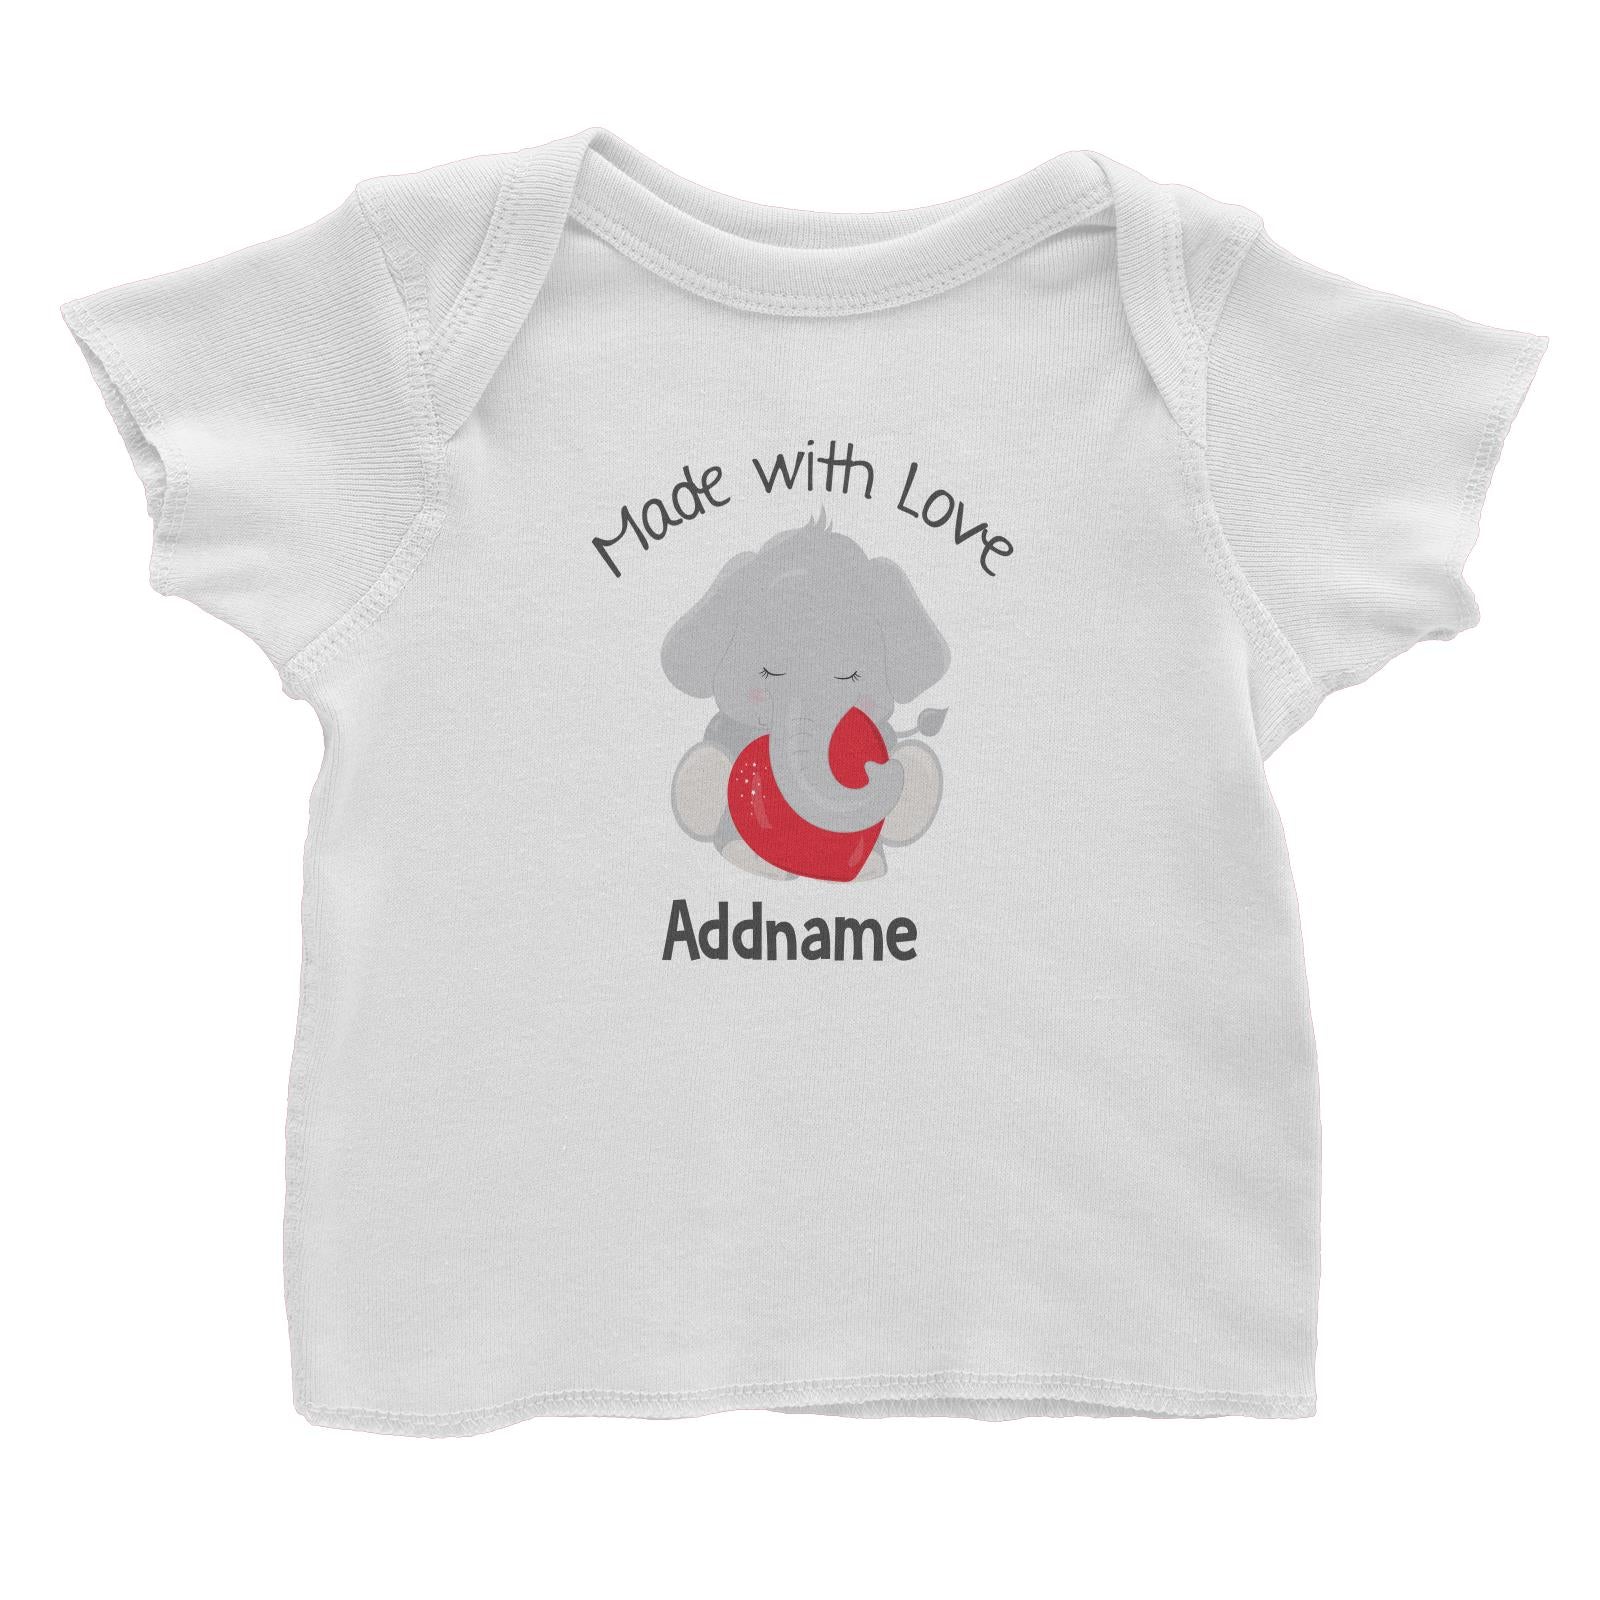 Animal Hearts Made With Love Elephant Addname Baby T-Shirt